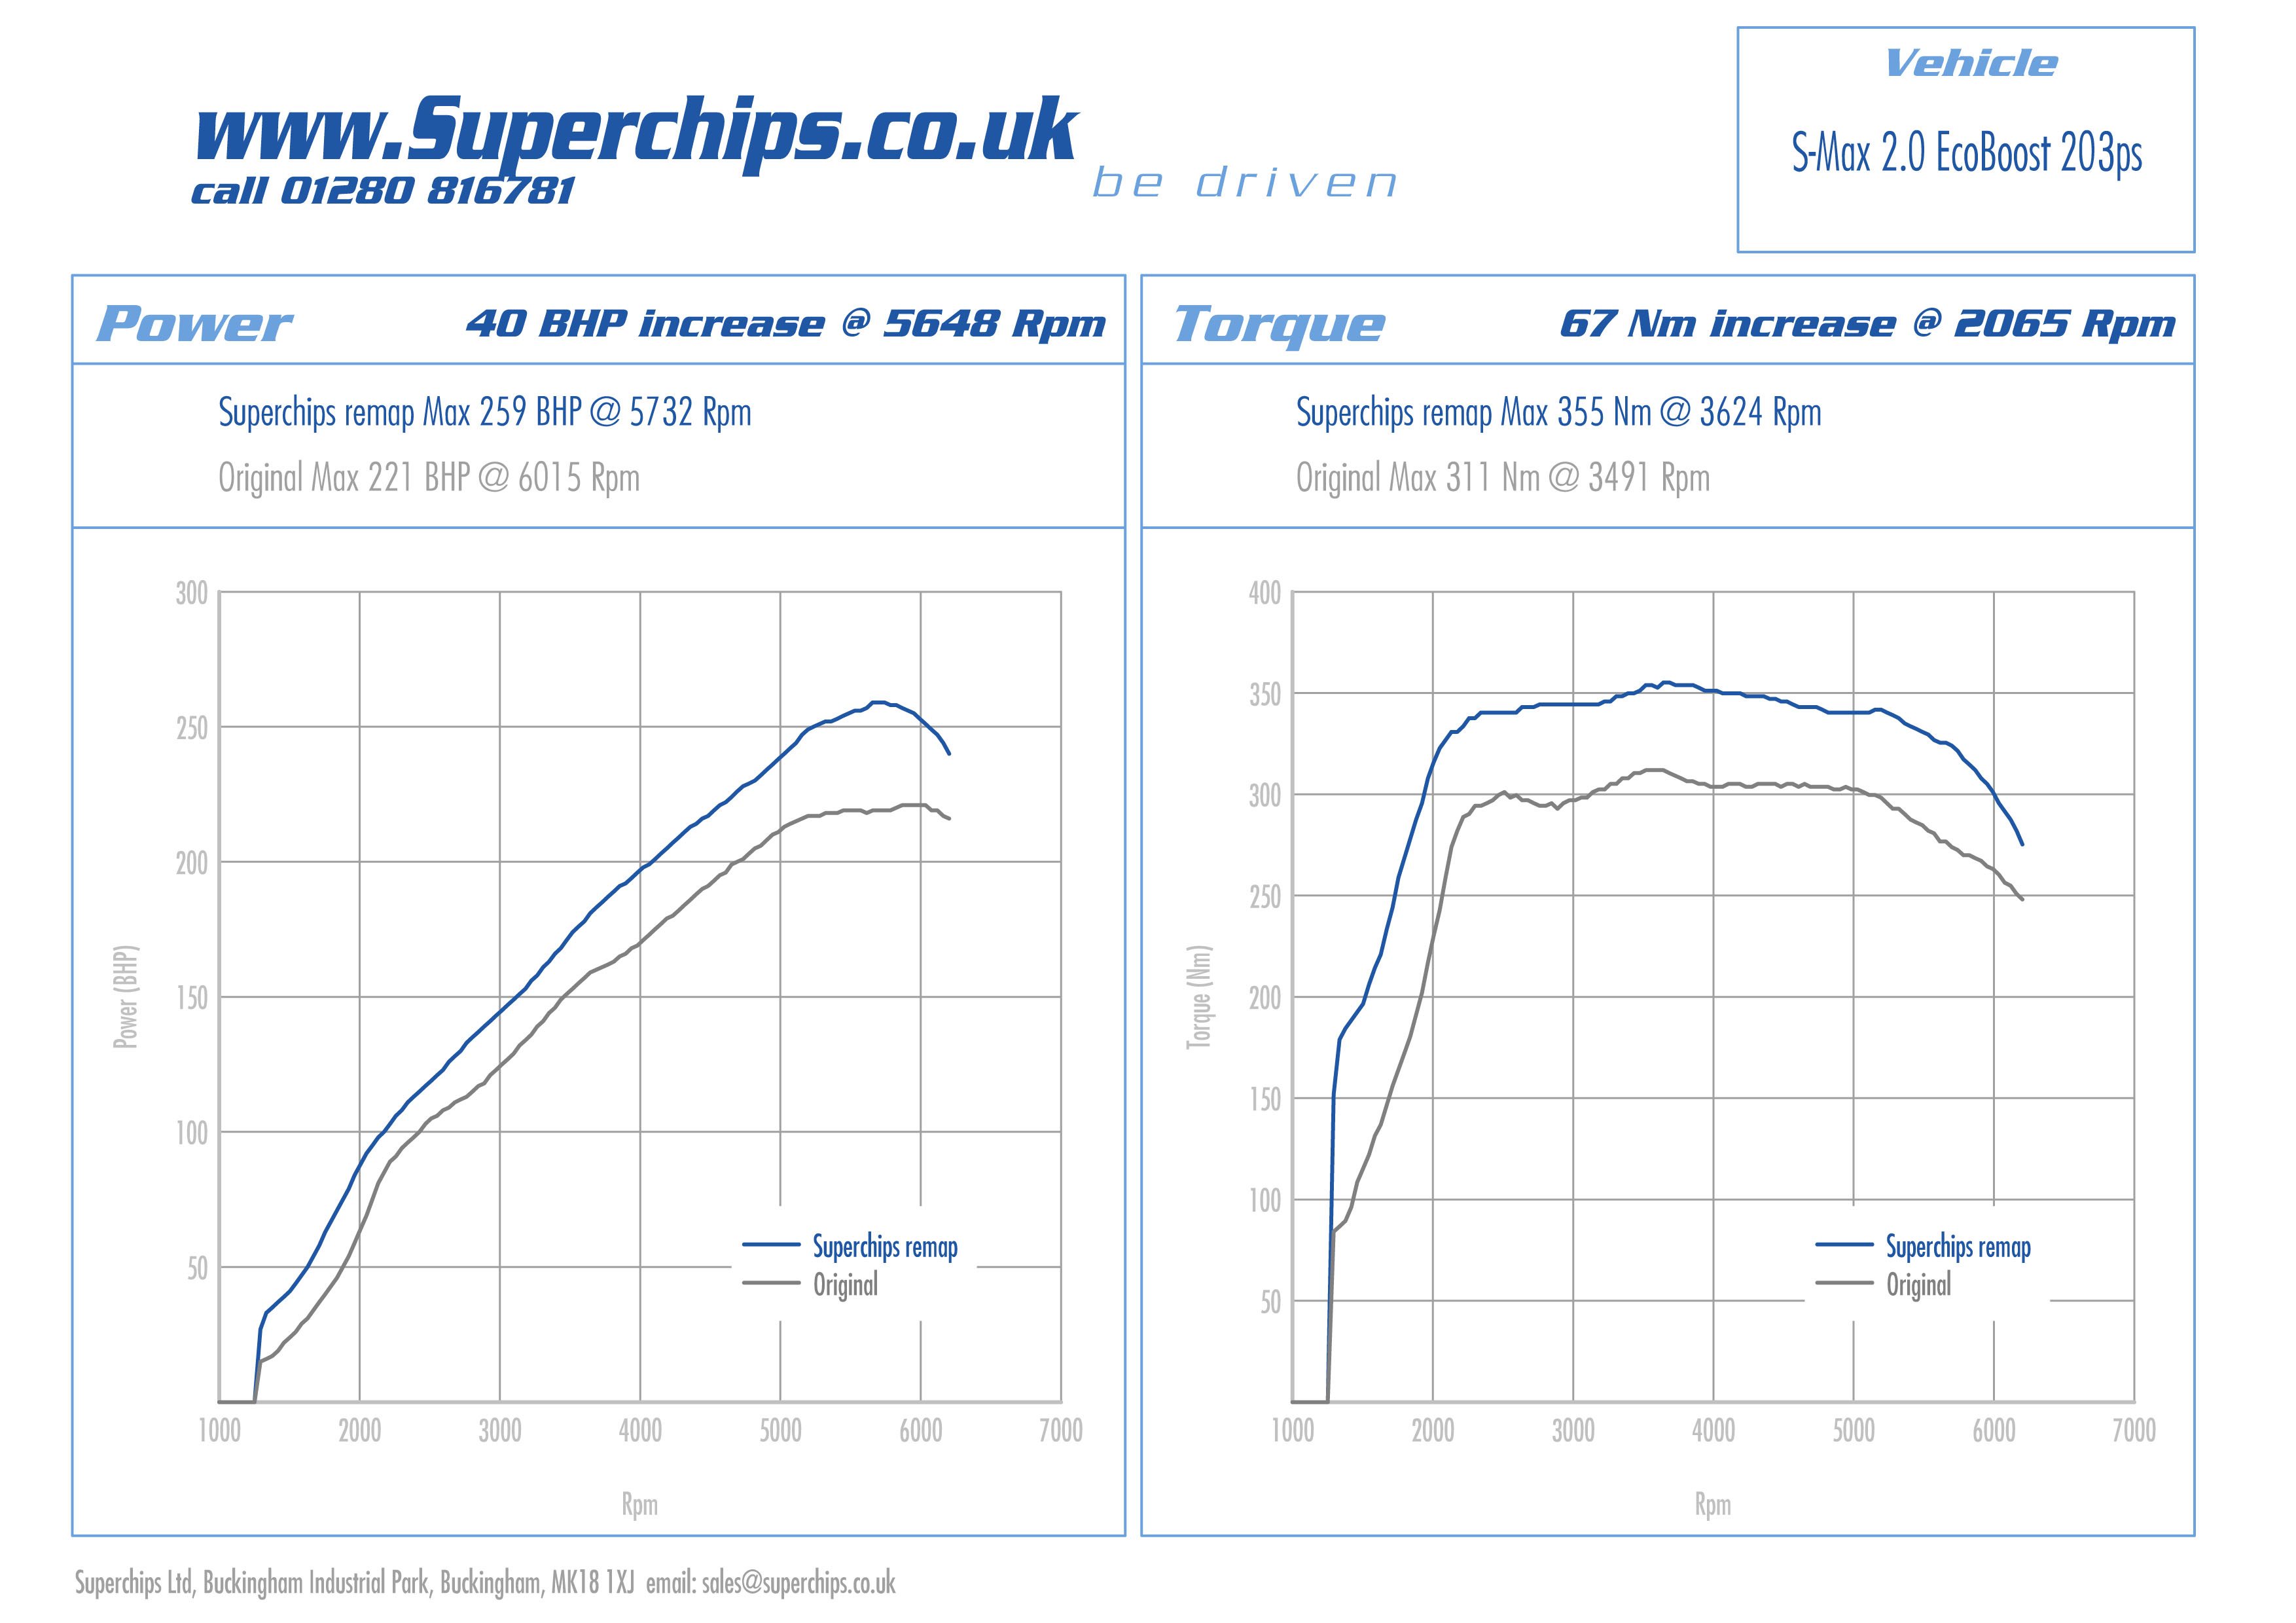 Ford ecoboost 1.6 torque curve